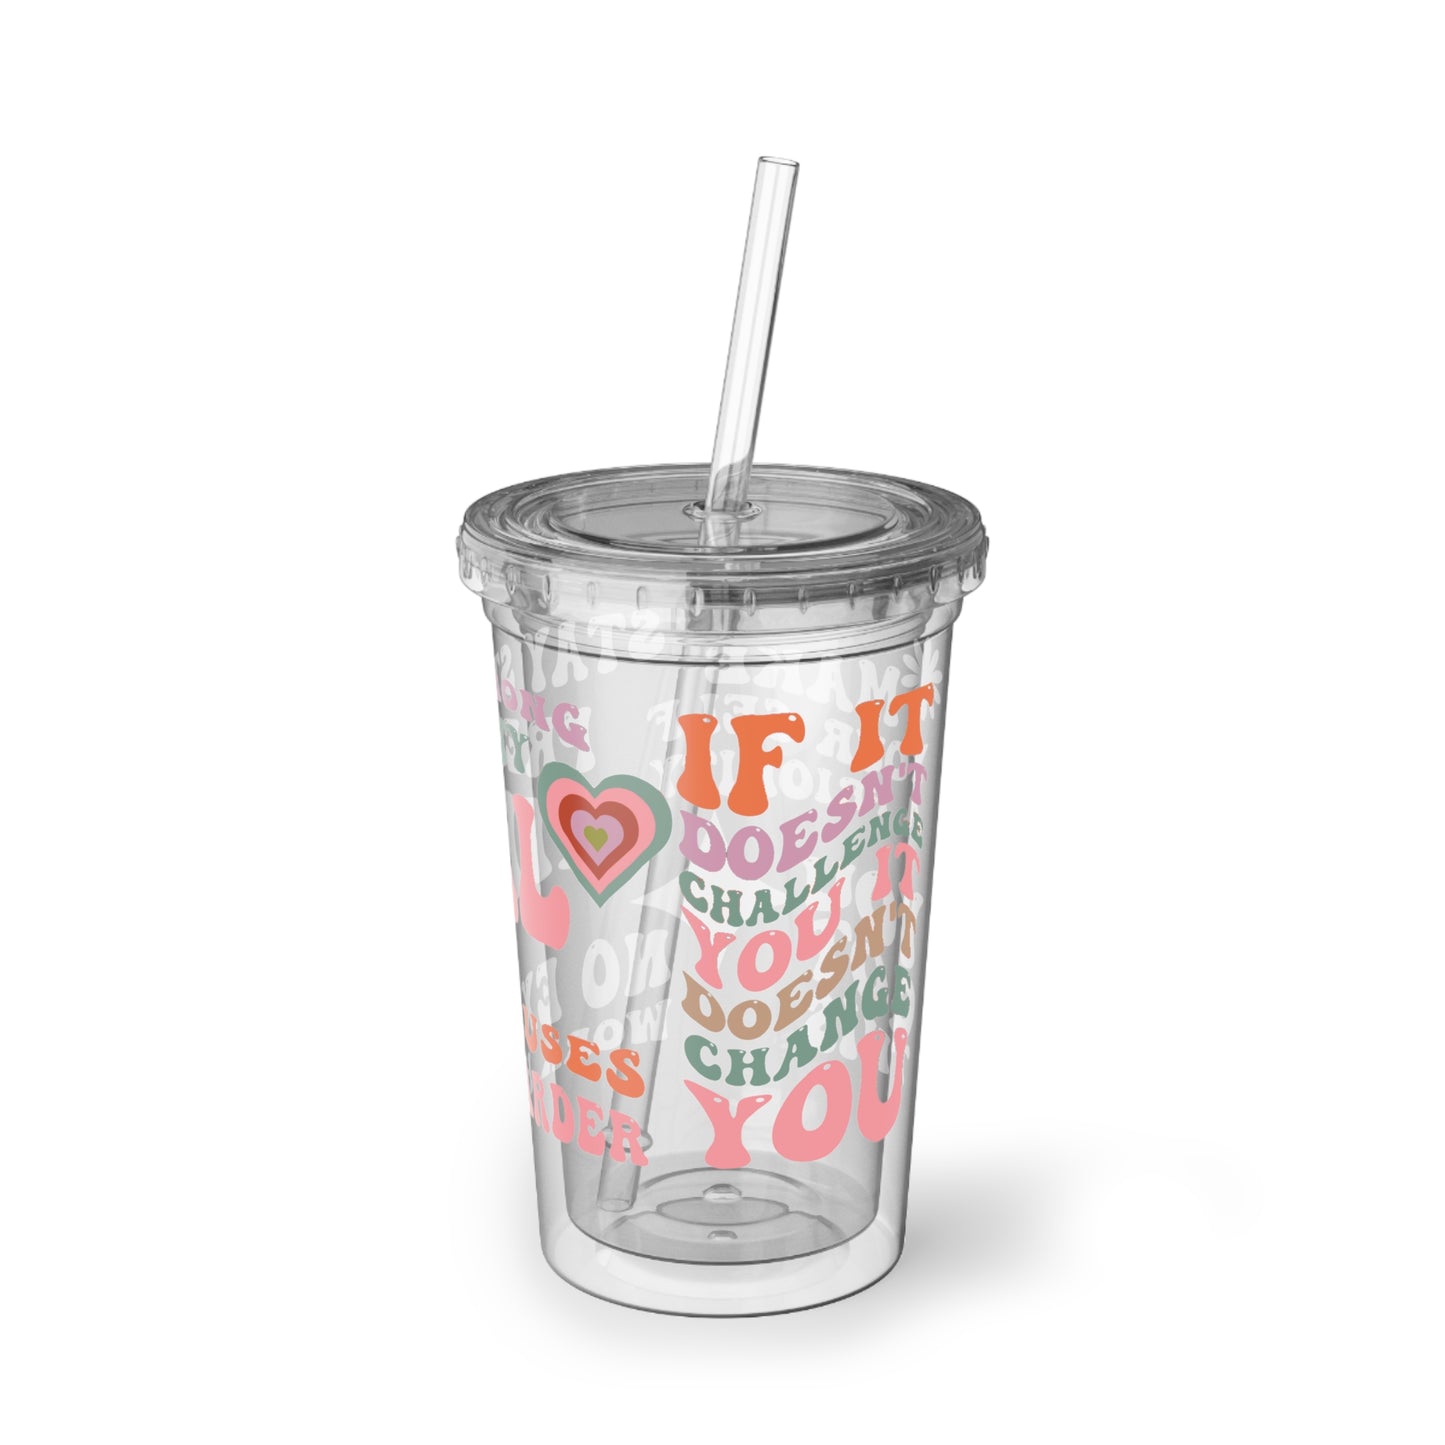 Positive Mindset reusable soft drink cups / Environment friendly cup